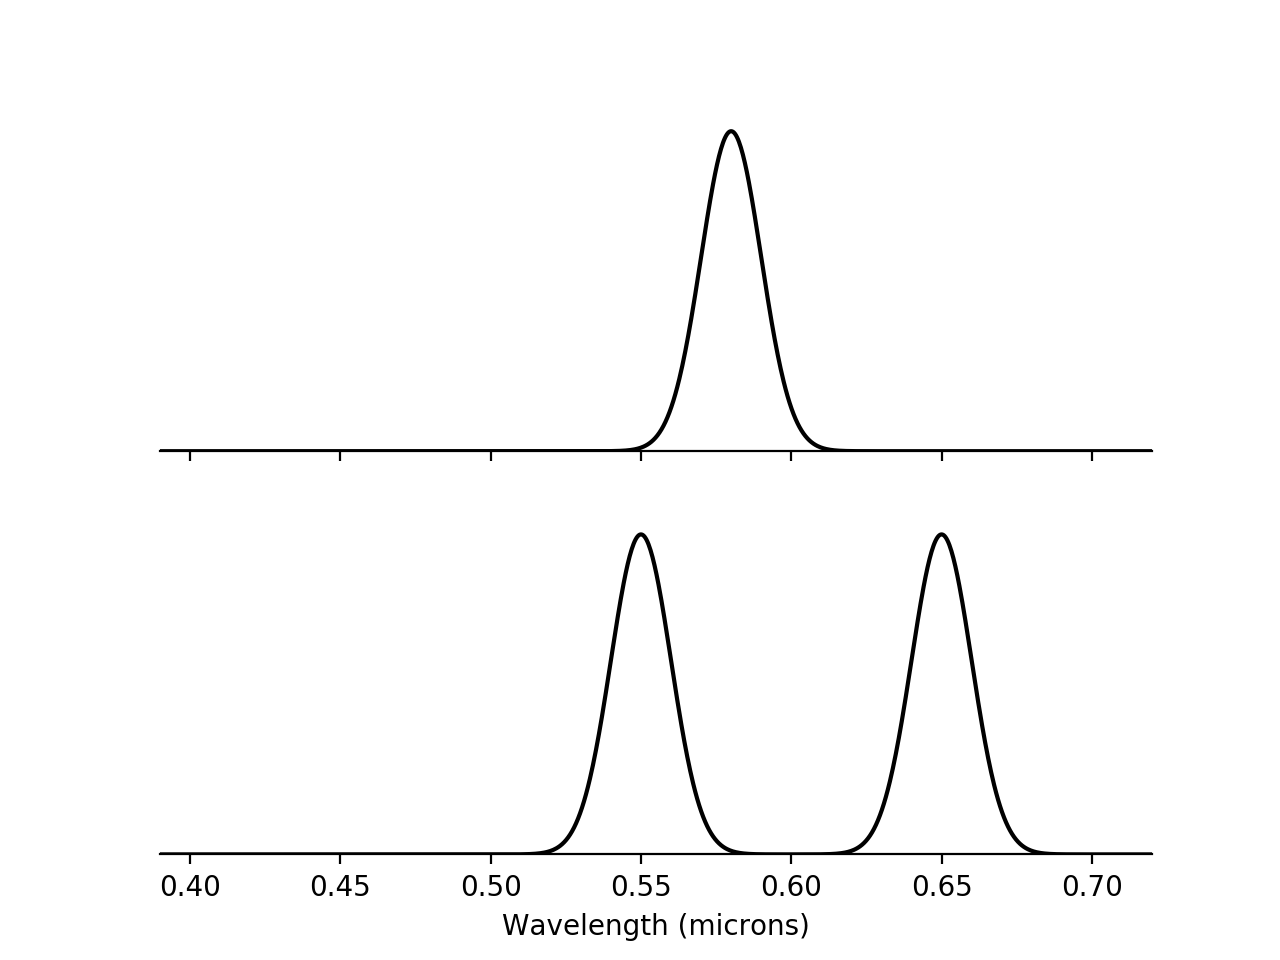 Spectra for two different beams of light, both of which are yellow. Above is the spectrum of a beam of light which contains only photons with a wavelength near 0.58 microns. Below is the spectrum of a beam of light which consists of a mixture of photons, some near 0.55 microns and some near 0.65 microns, like might be produced by the green and red pixels in a computer monitor.